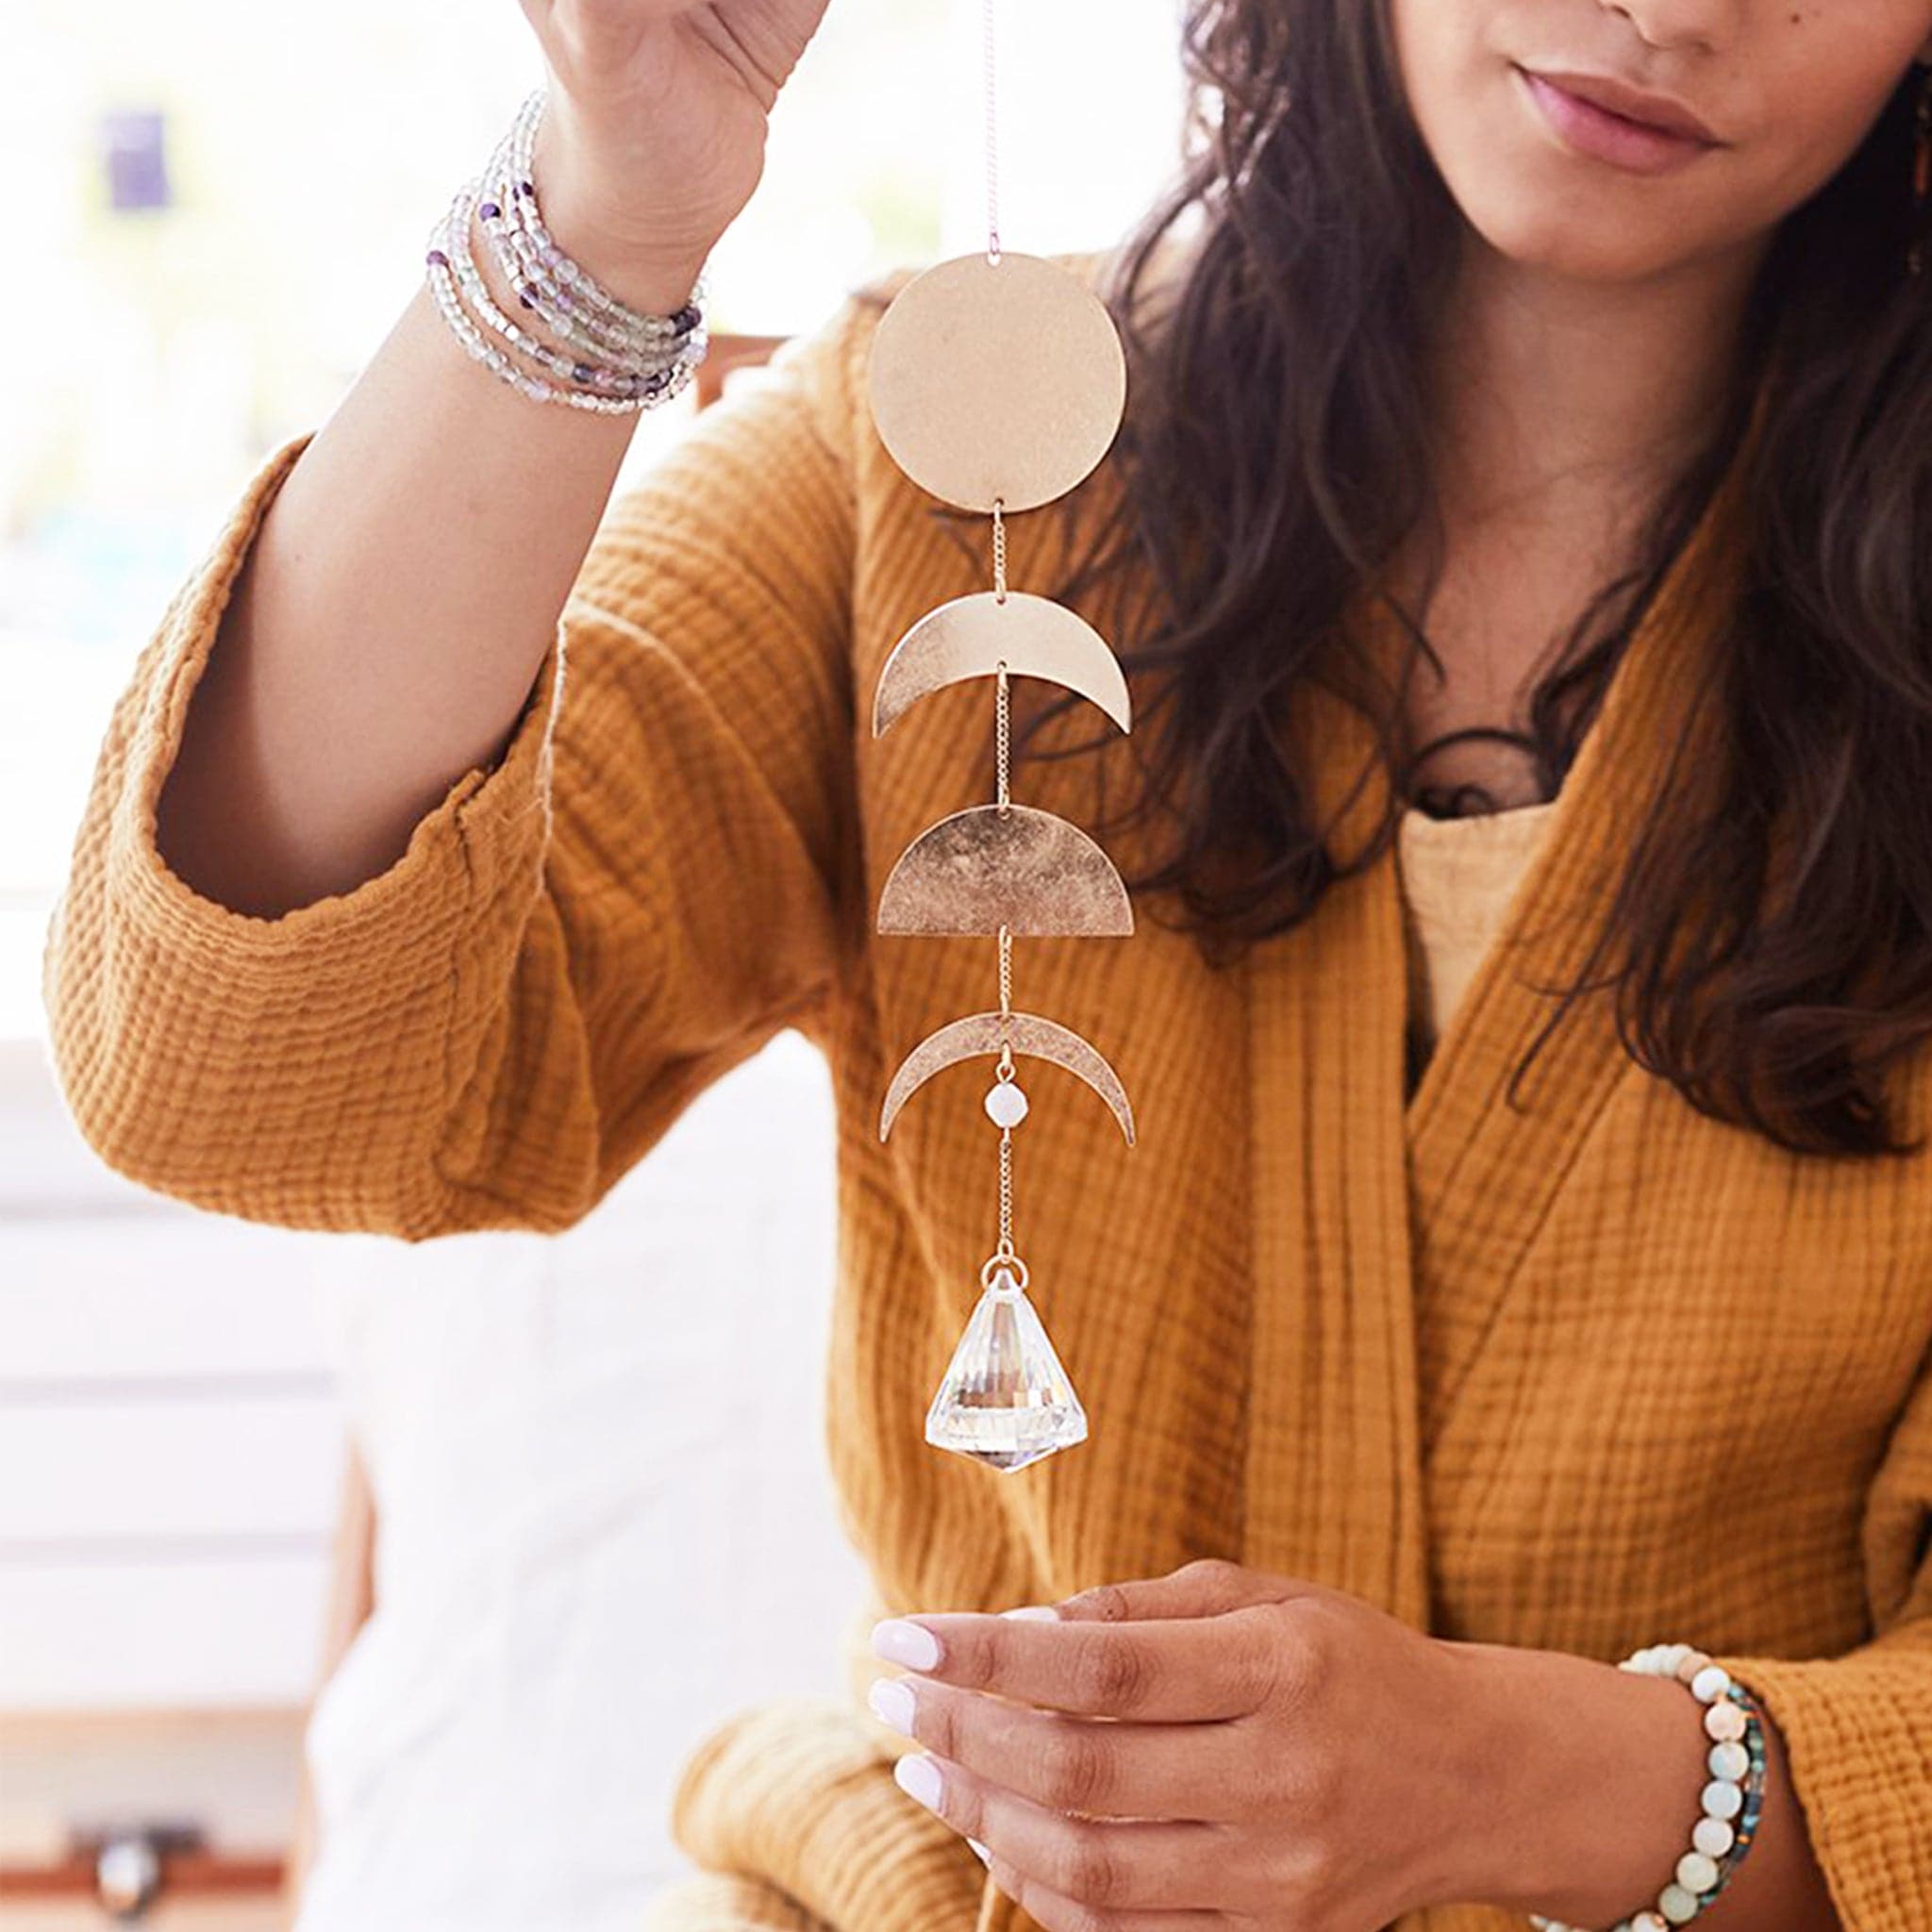 This is a picture of a woman holding wearing a burnt orange jacket. She has long brown hair. In her right hand she is holding a suncatcher. It is a gold chain with a clear, crystal prism at the bottom. Above that is a brown bead. Next is a gold, metal crescent moon shape. Next is a gold, metal half circle. Above that is another gold, metal crescent moon shape just a little thicker. At the top is a gold, metal circle. 